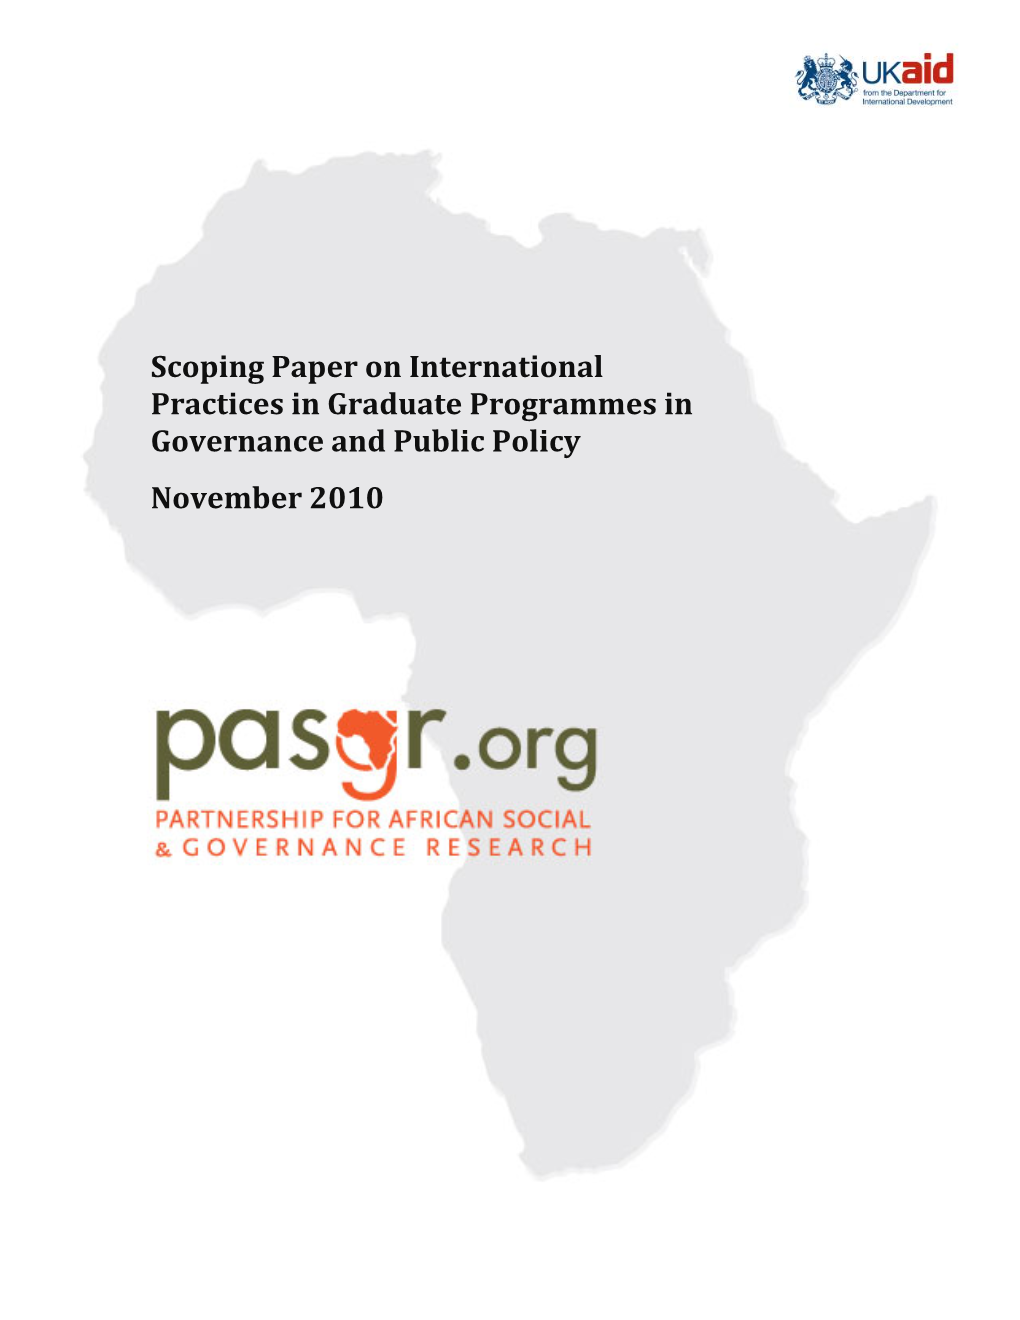 Pasgr Scoping Study 02-2010 International Practices in Graduate Programmes in Governance and Public Policy